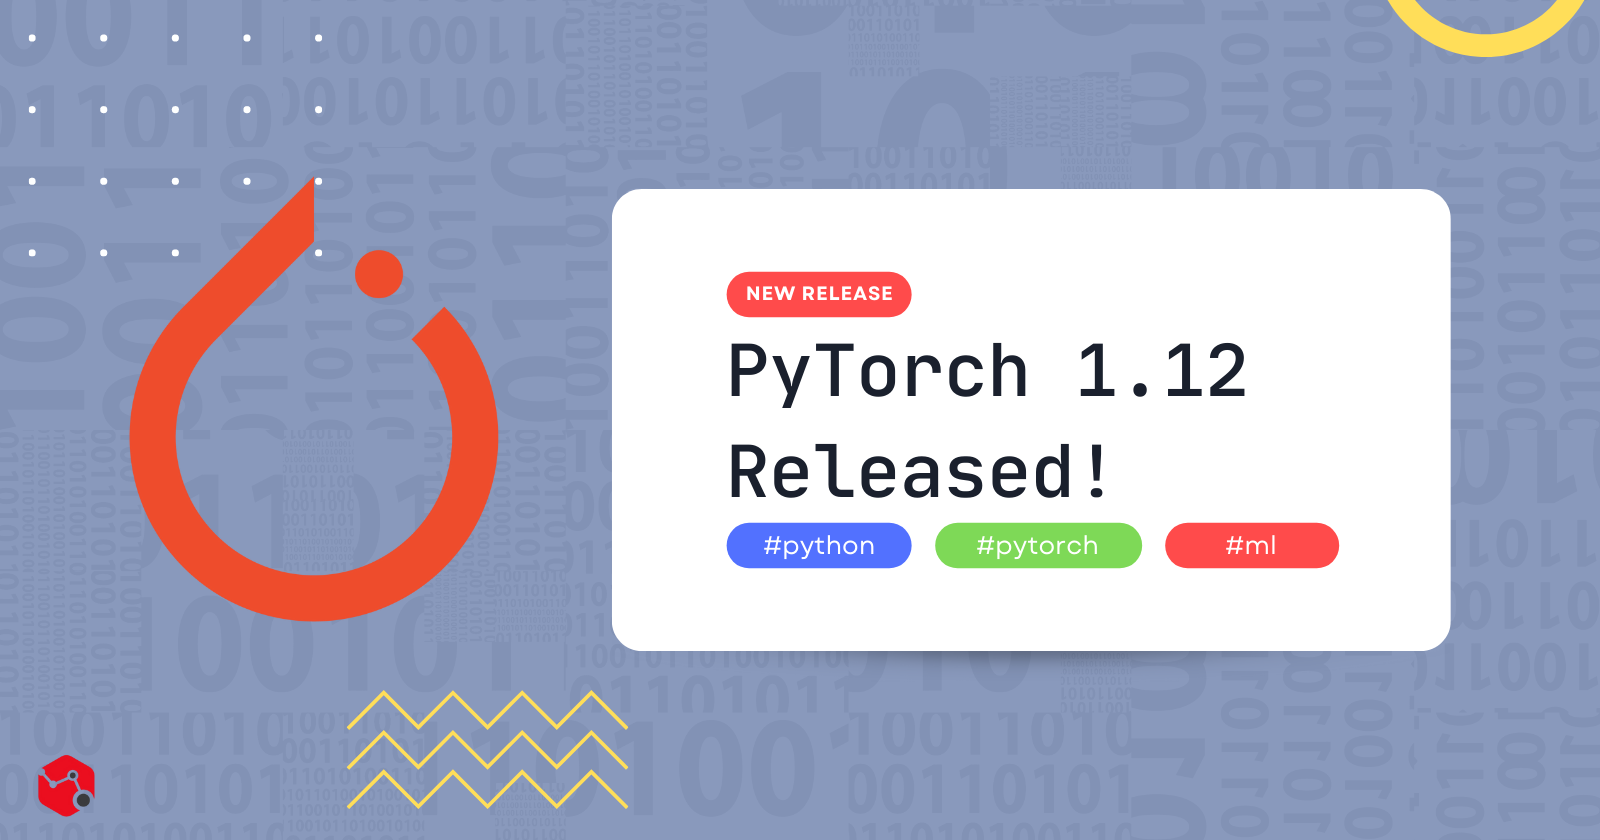 PyTorch 1.12 has been released!